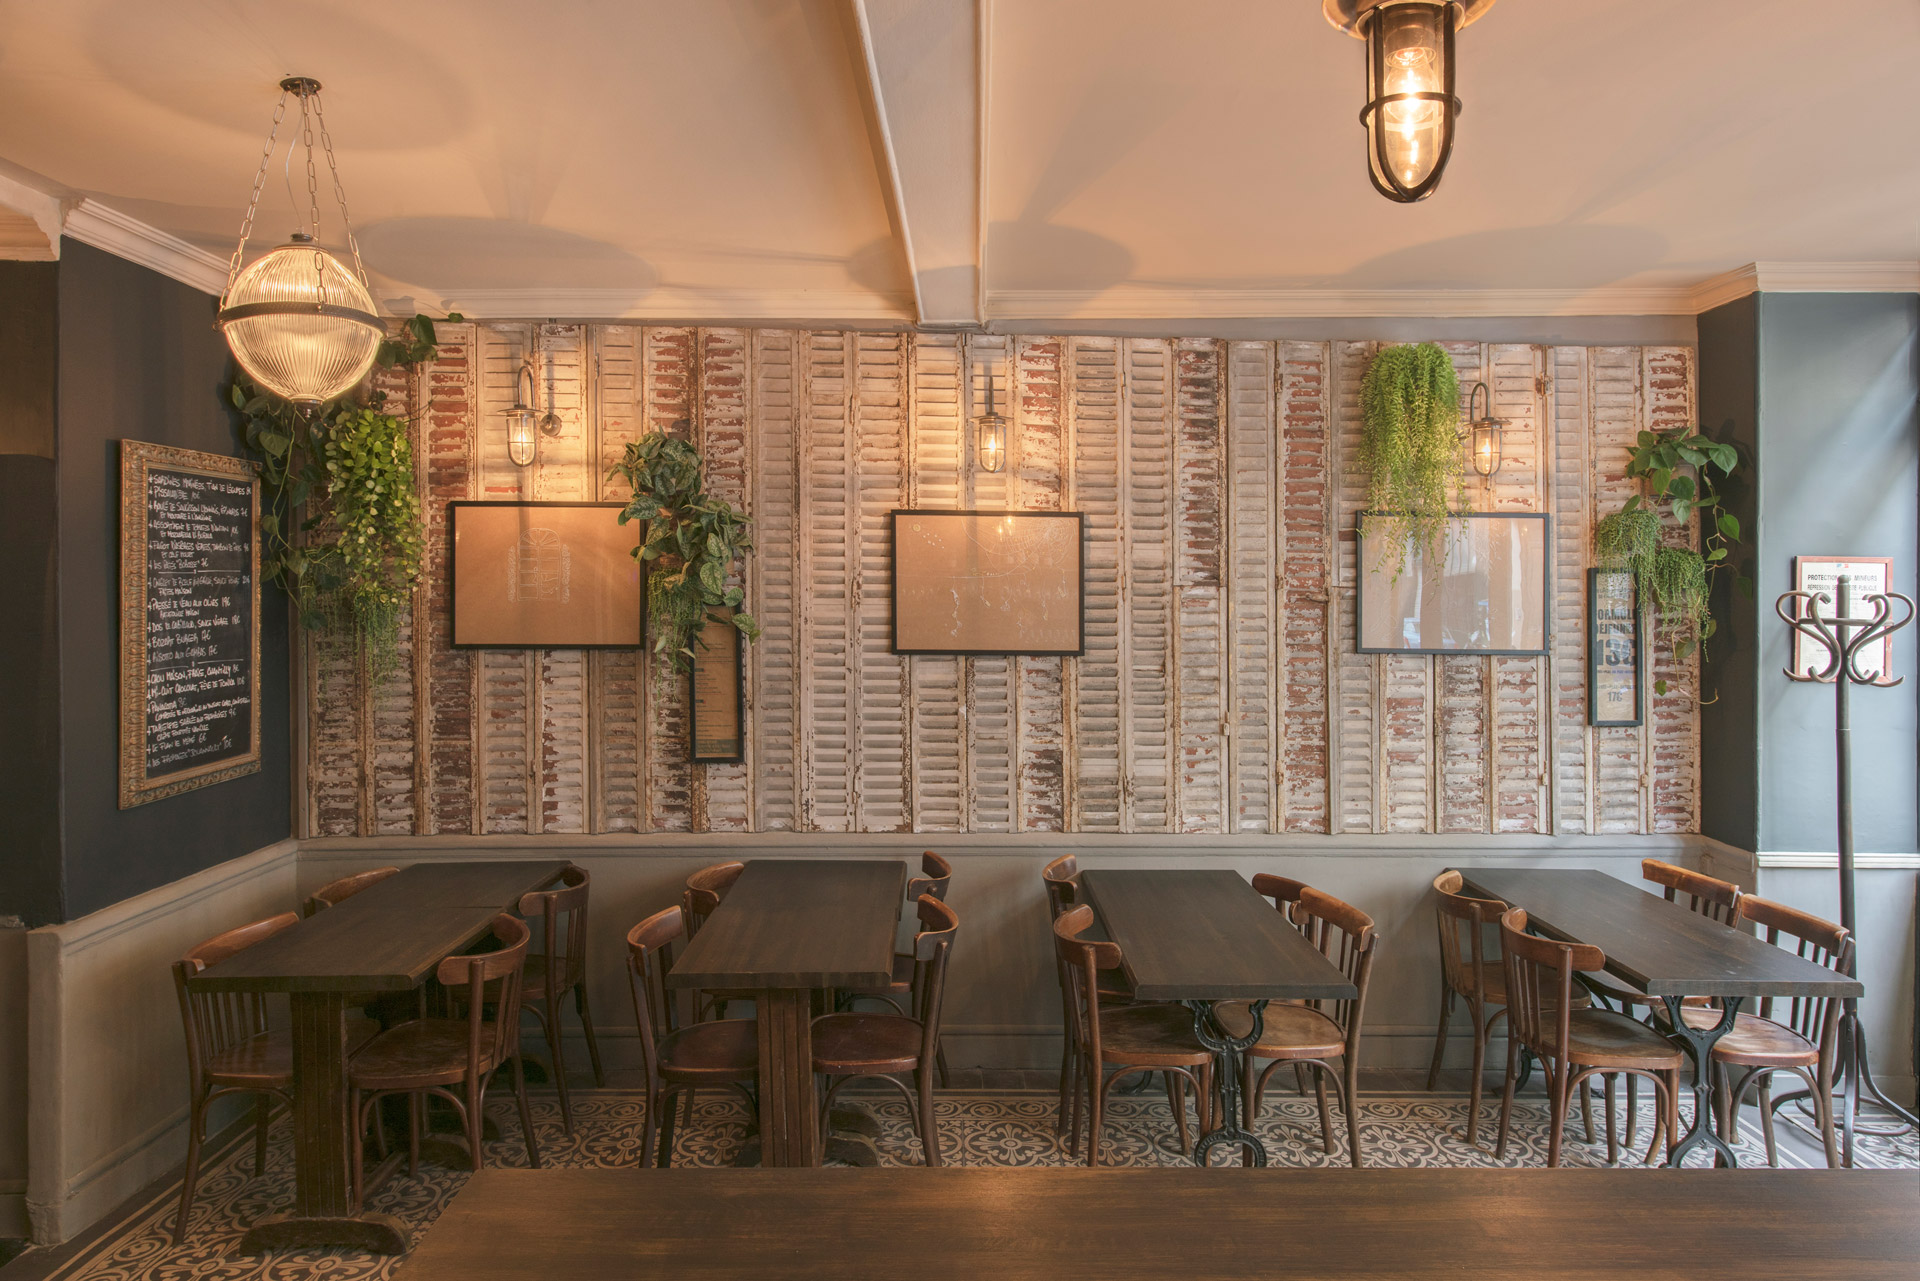 Our well glass wall lights help create an intimate dining experience at this Parisian restaurant